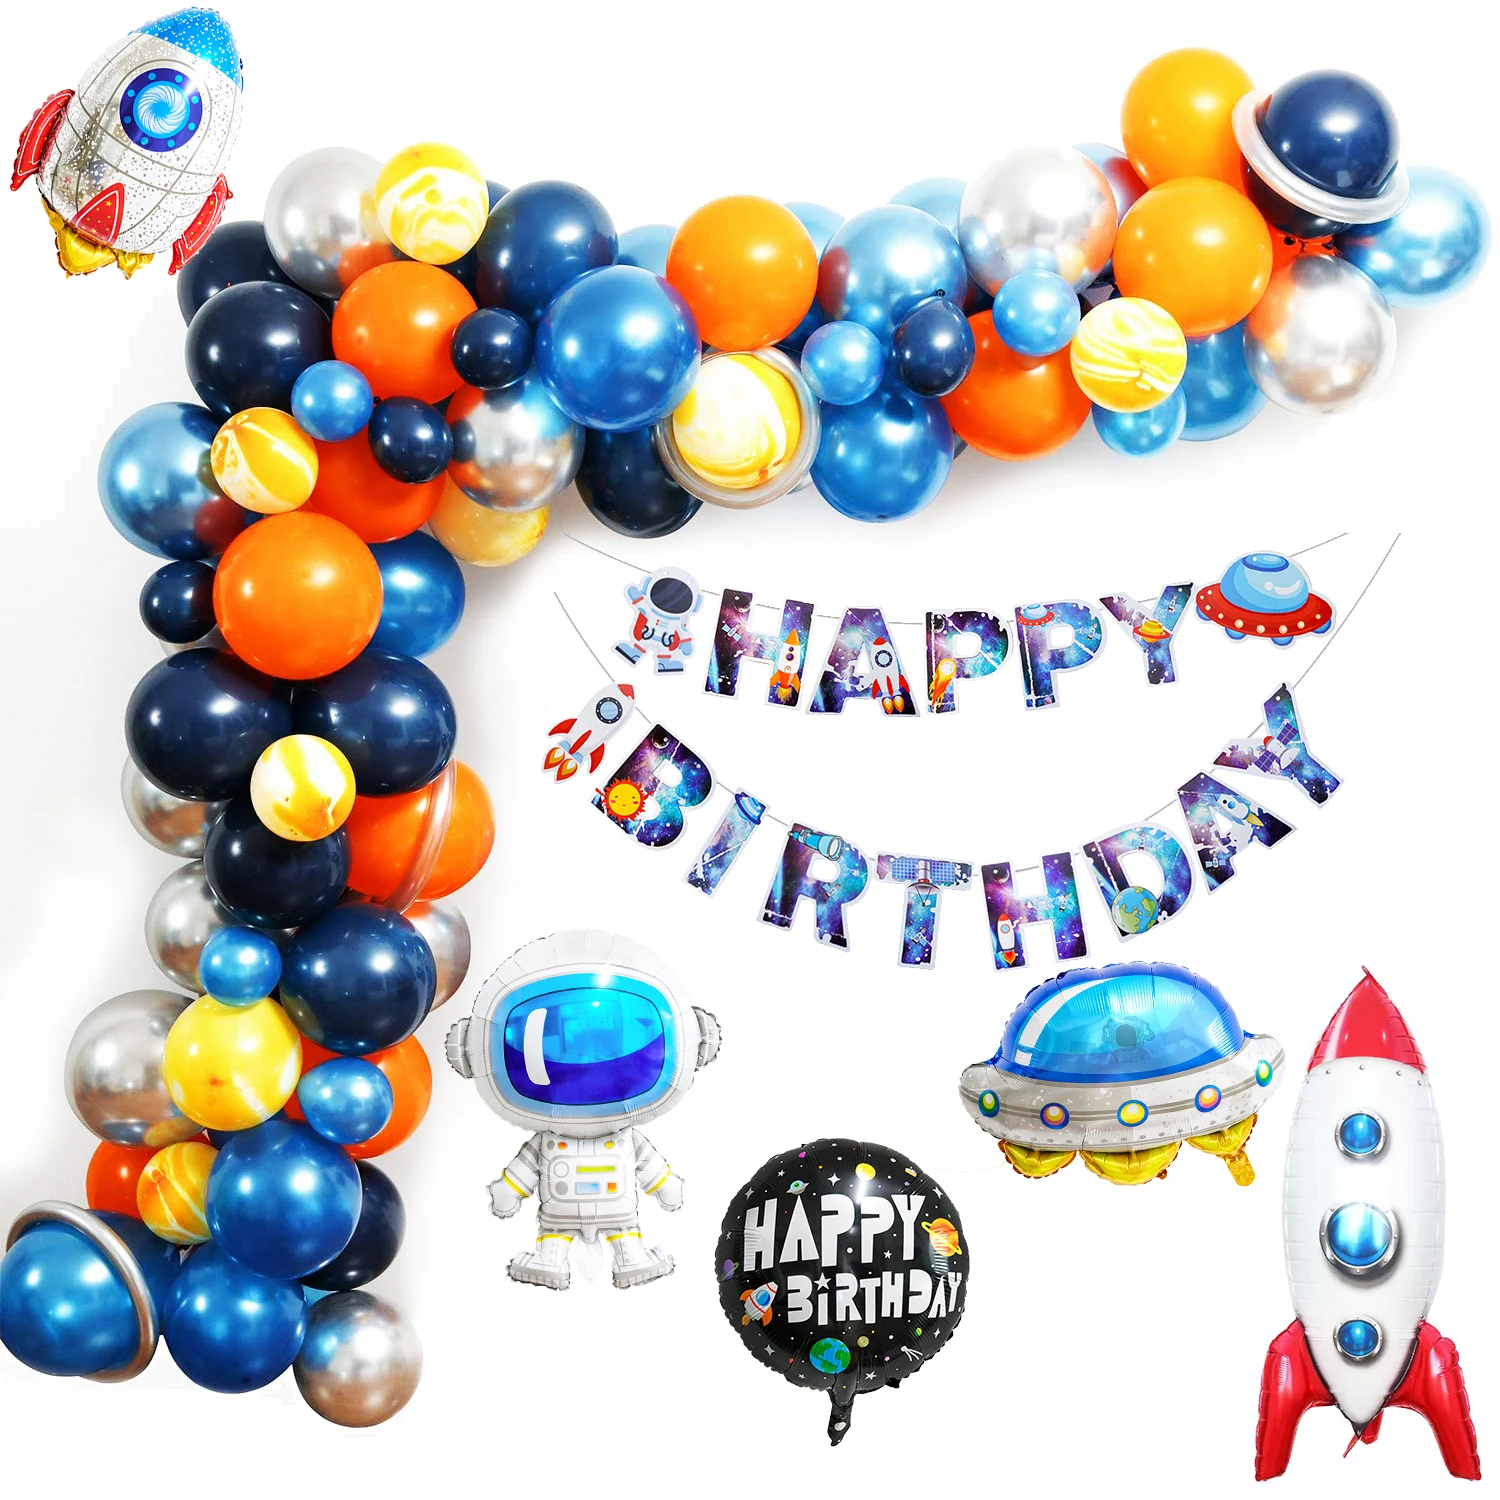 

85pcs Universe Outer Space Astronaut Rocket Galaxy Theme Latex Foil Balloons Garland Arch Kit Boy Birthday Party Decorations